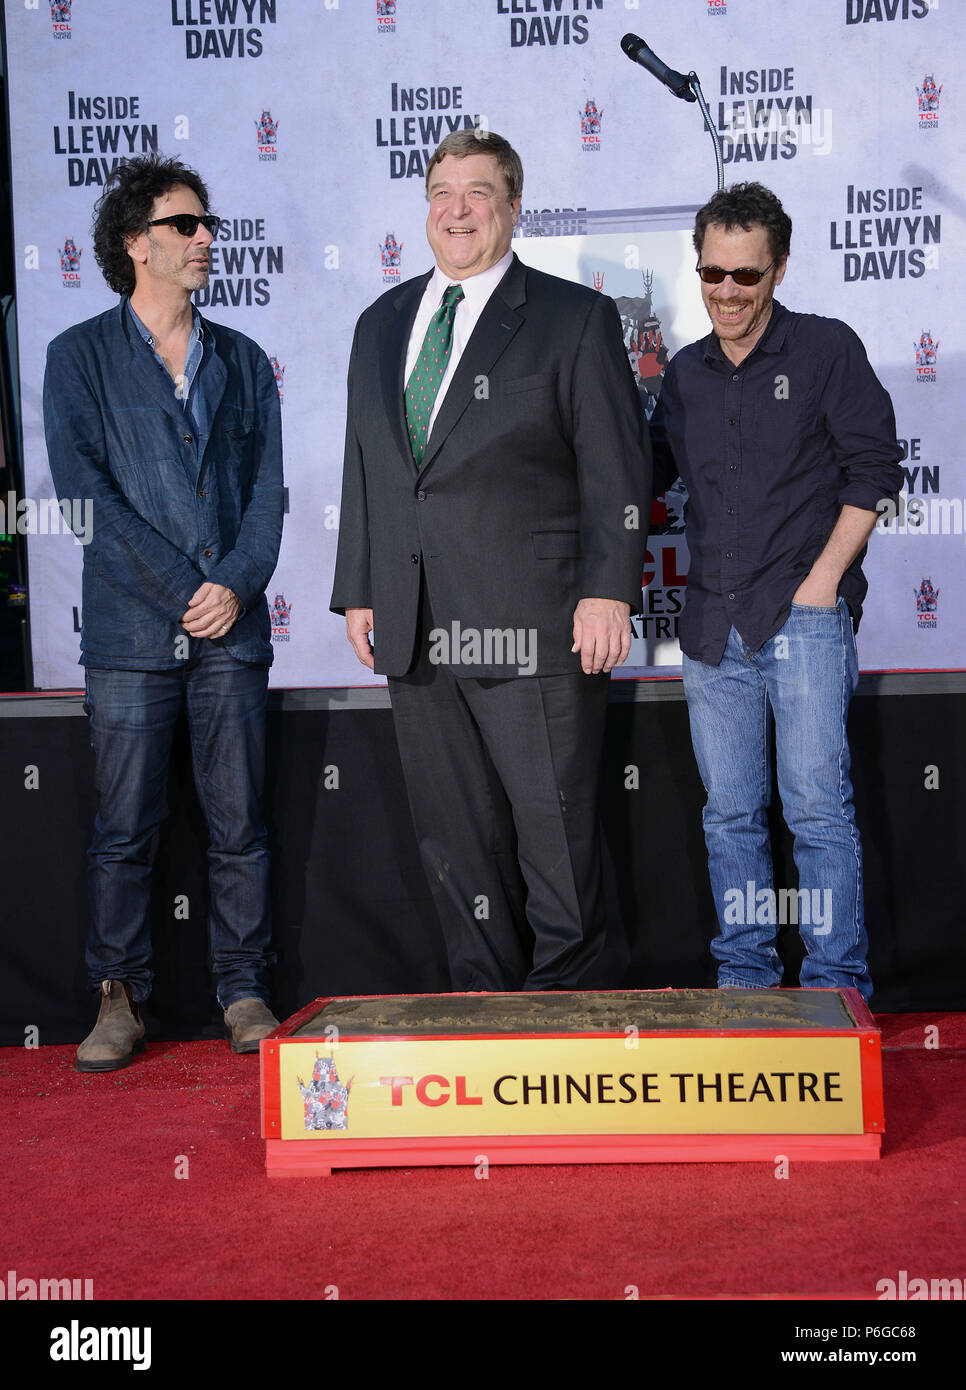 John Goodman with Joel & Ethan Cohen   at the ceremony honoring John Goodman  with hand and foot print at the TCL Chinese Theatre in Los Angeles.a John Goodman with Joel & Ethan Cohen  008  Event in Hollywood Life - California, Red Carpet Event, USA, Film Industry, Celebrities, Photography, Bestof, Arts Culture and Entertainment, Topix Celebrities fashion, Best of, Hollywood Life, Event in Hollywood Life - California, movie celebrities, TV celebrities, Music celebrities, Topix, Bestof, Arts Culture and Entertainment, Photography,    inquiry tsuni@Gamma-USA.com , Credit Tsuni / USA, Honored wit Stock Photo